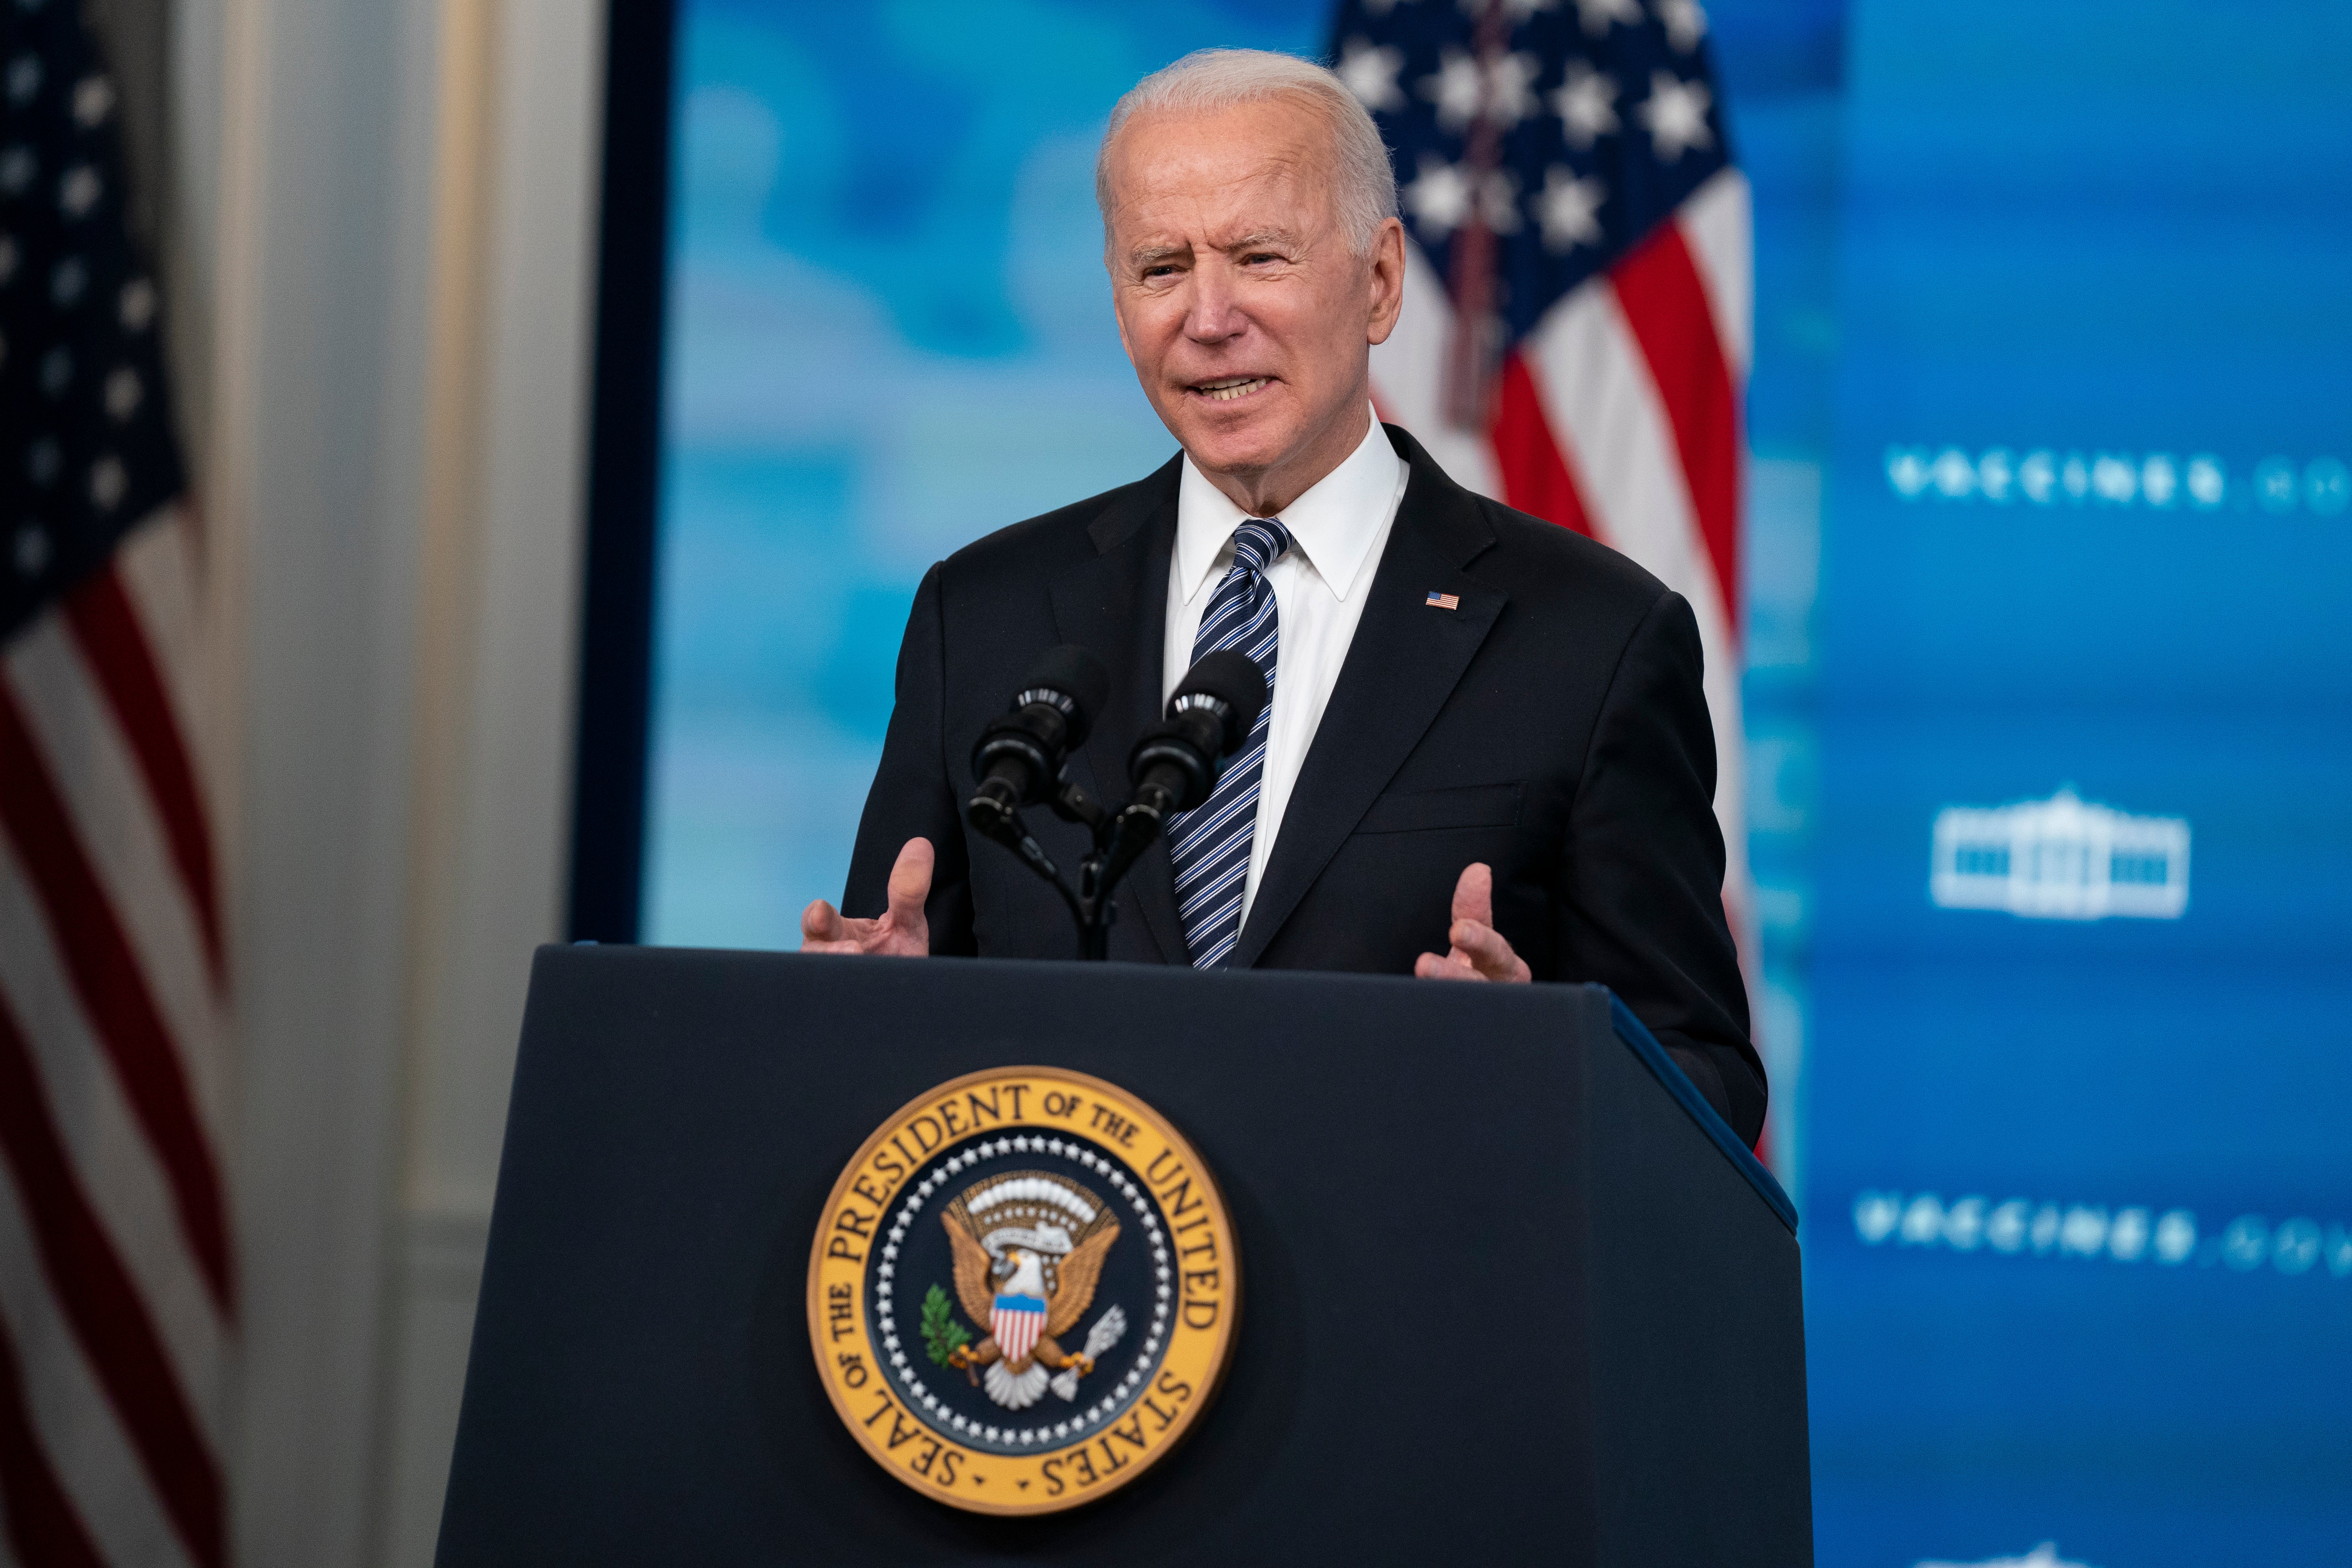 The group Flag Officers 4 America questioned President Biden’s health in an open letter